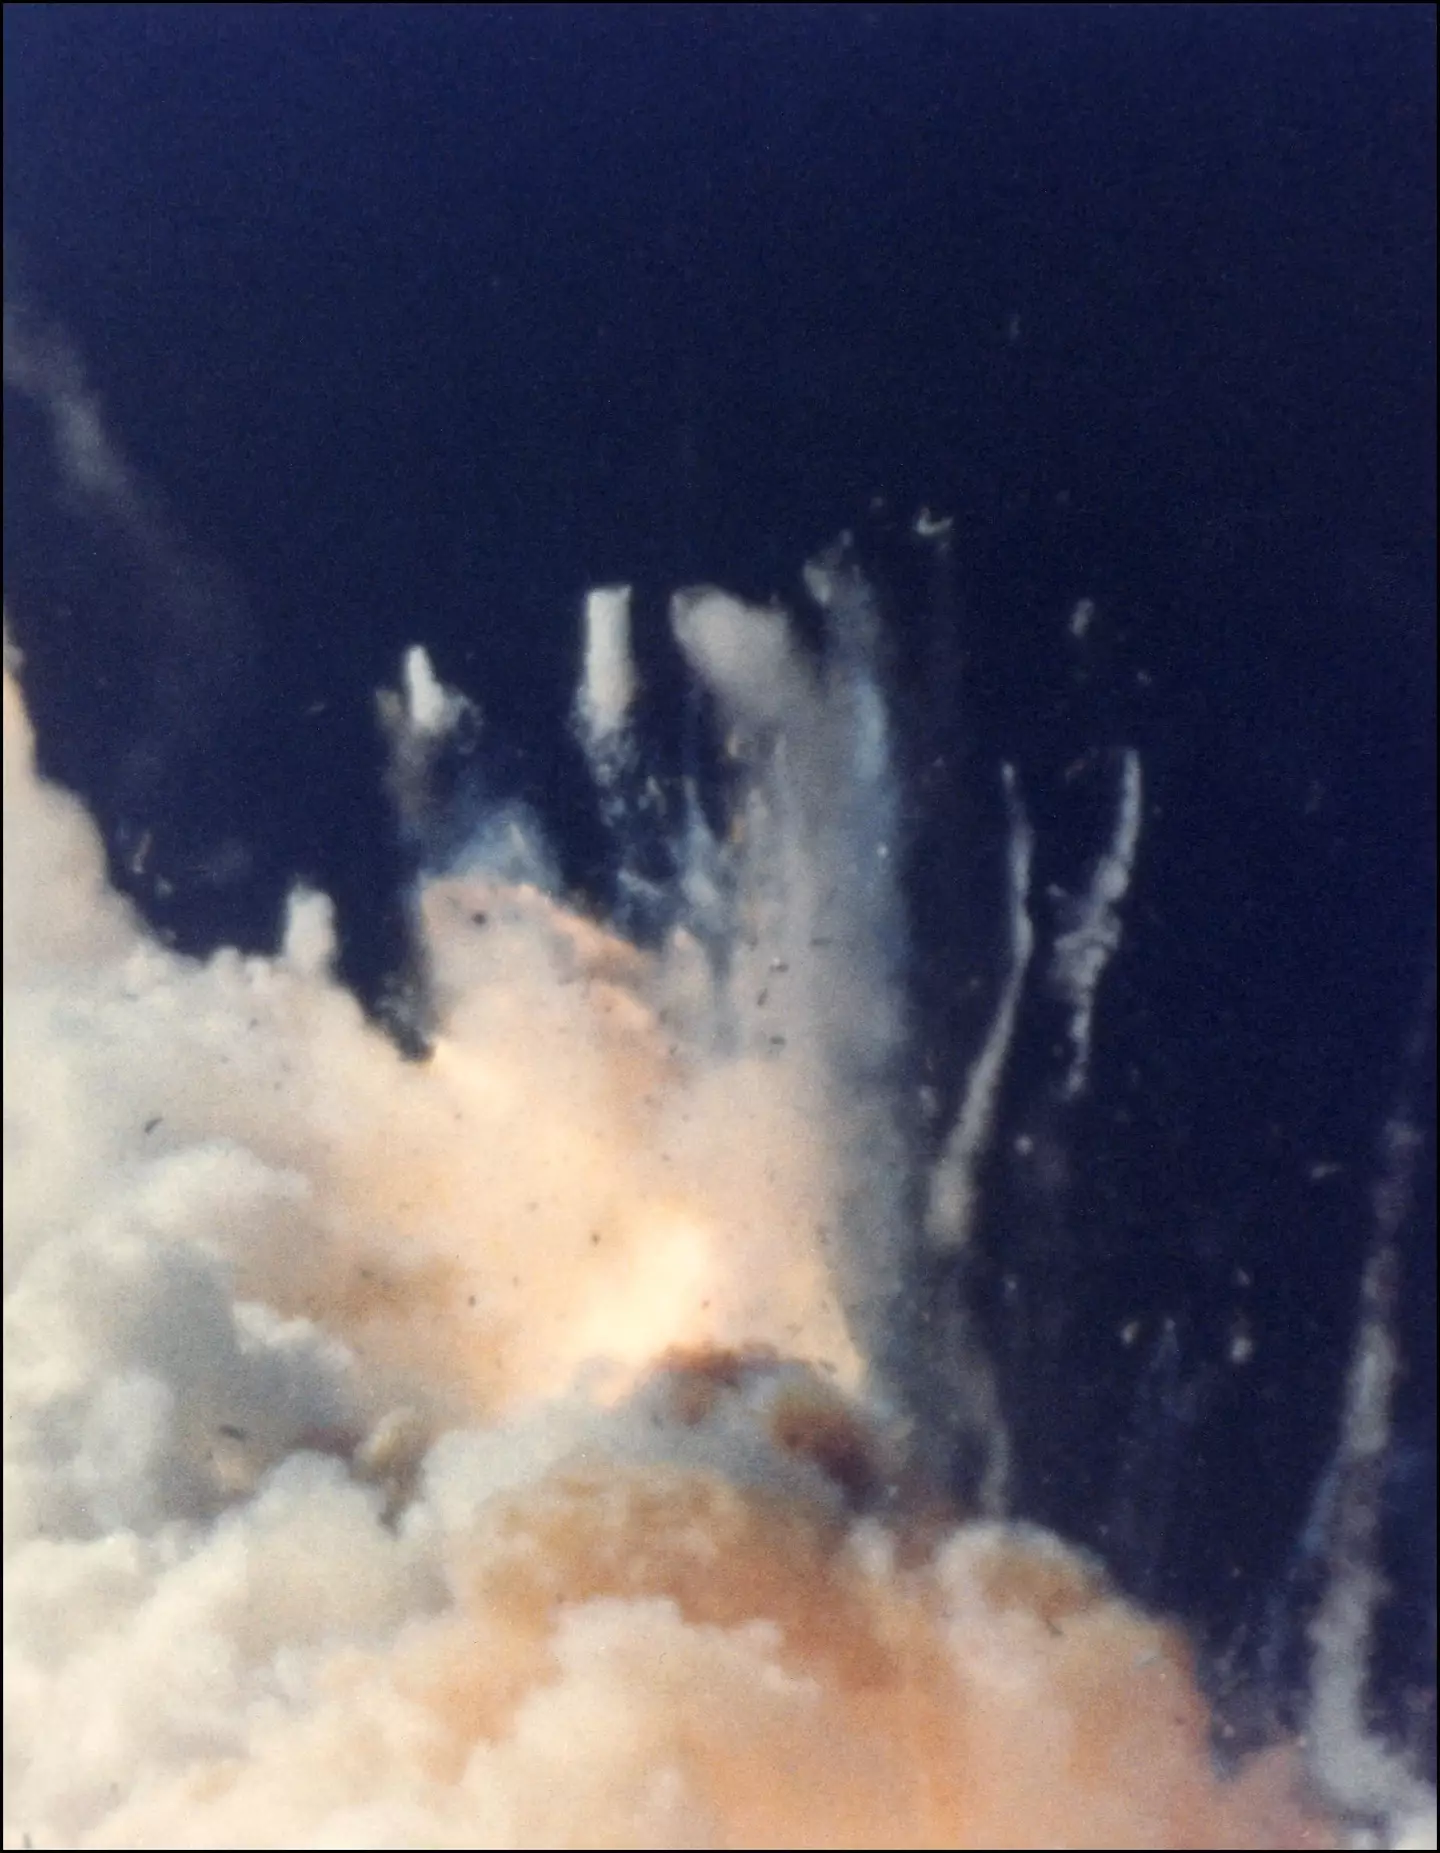 The Challenger is one of the most awful NASA accidents. NASA/AFP via Getty Images